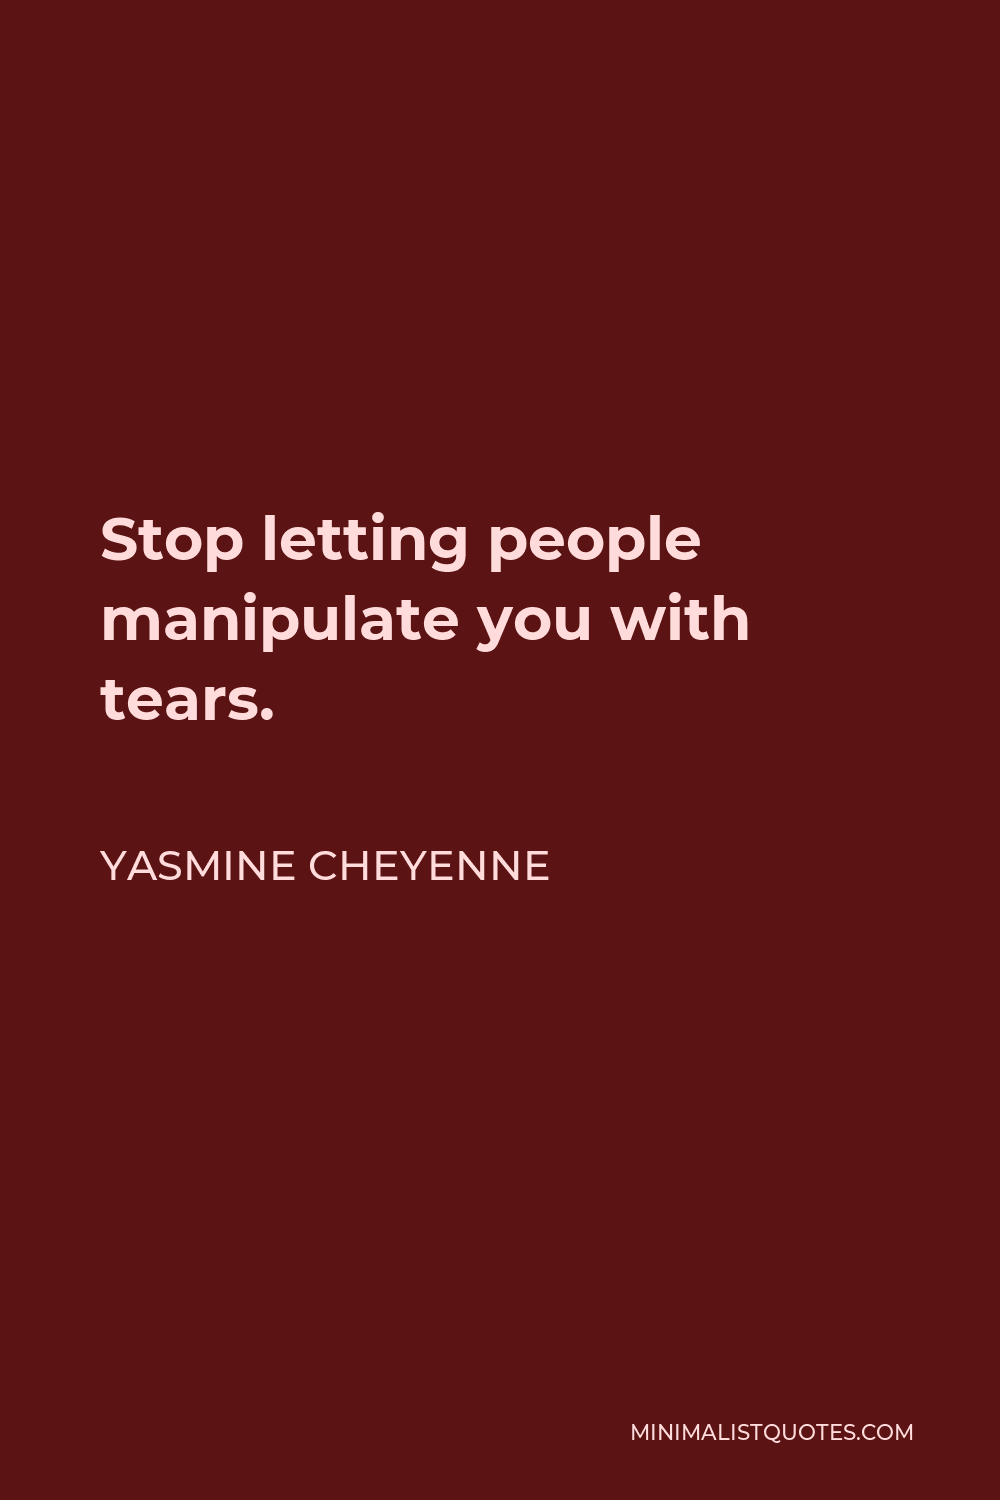 Yasmine Cheyenne Quote - Stop letting people manipulate you with tears.